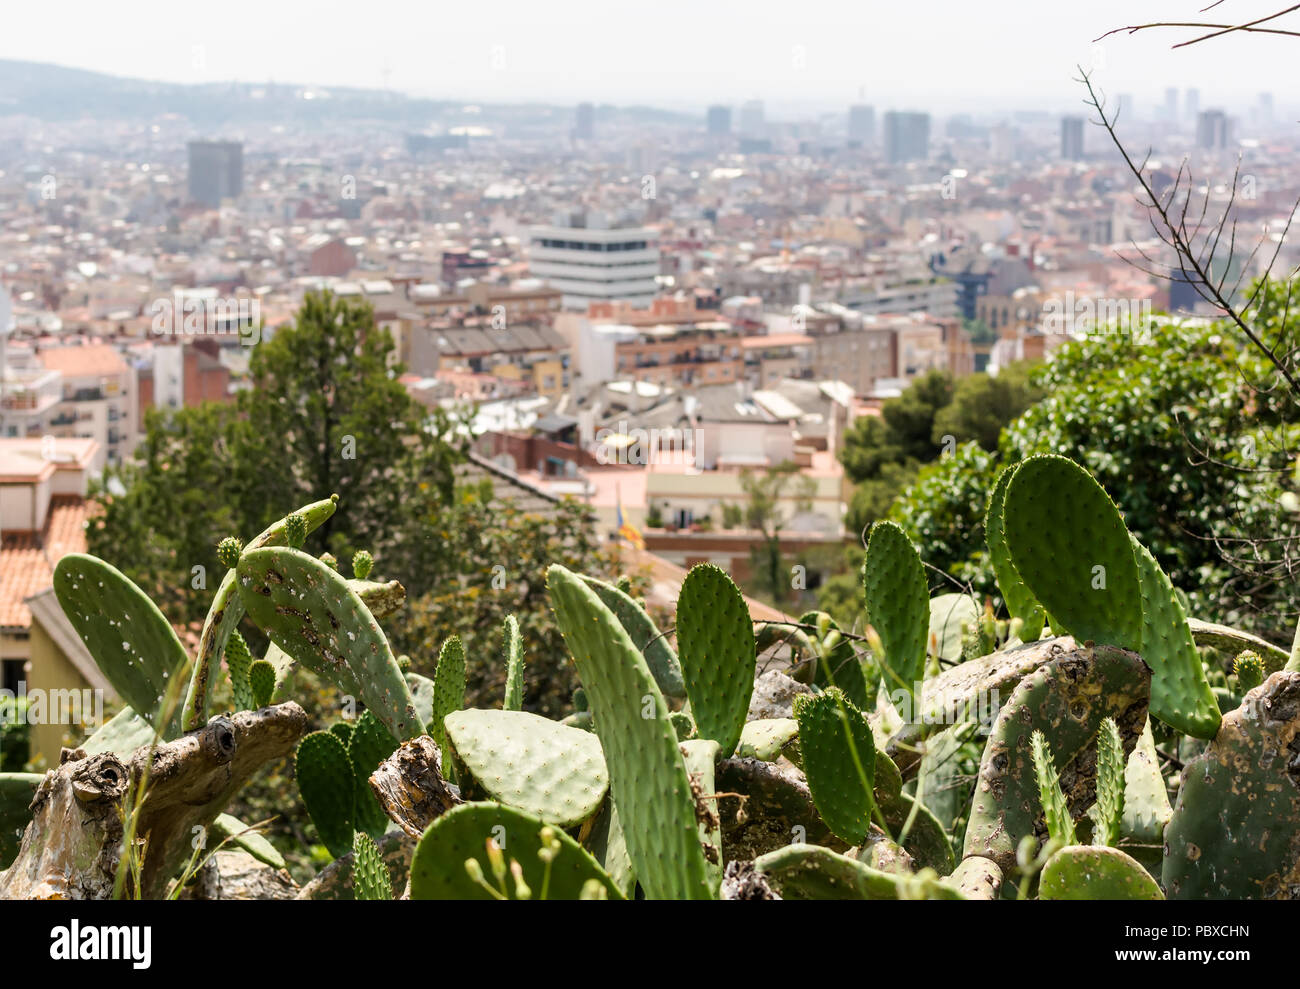 Opuntia, commonly called prickly pear, in Park Guell with aerial view to Barcelona city. Opuntia is a genus in the cactus family, Cactaceae. Stock Photo